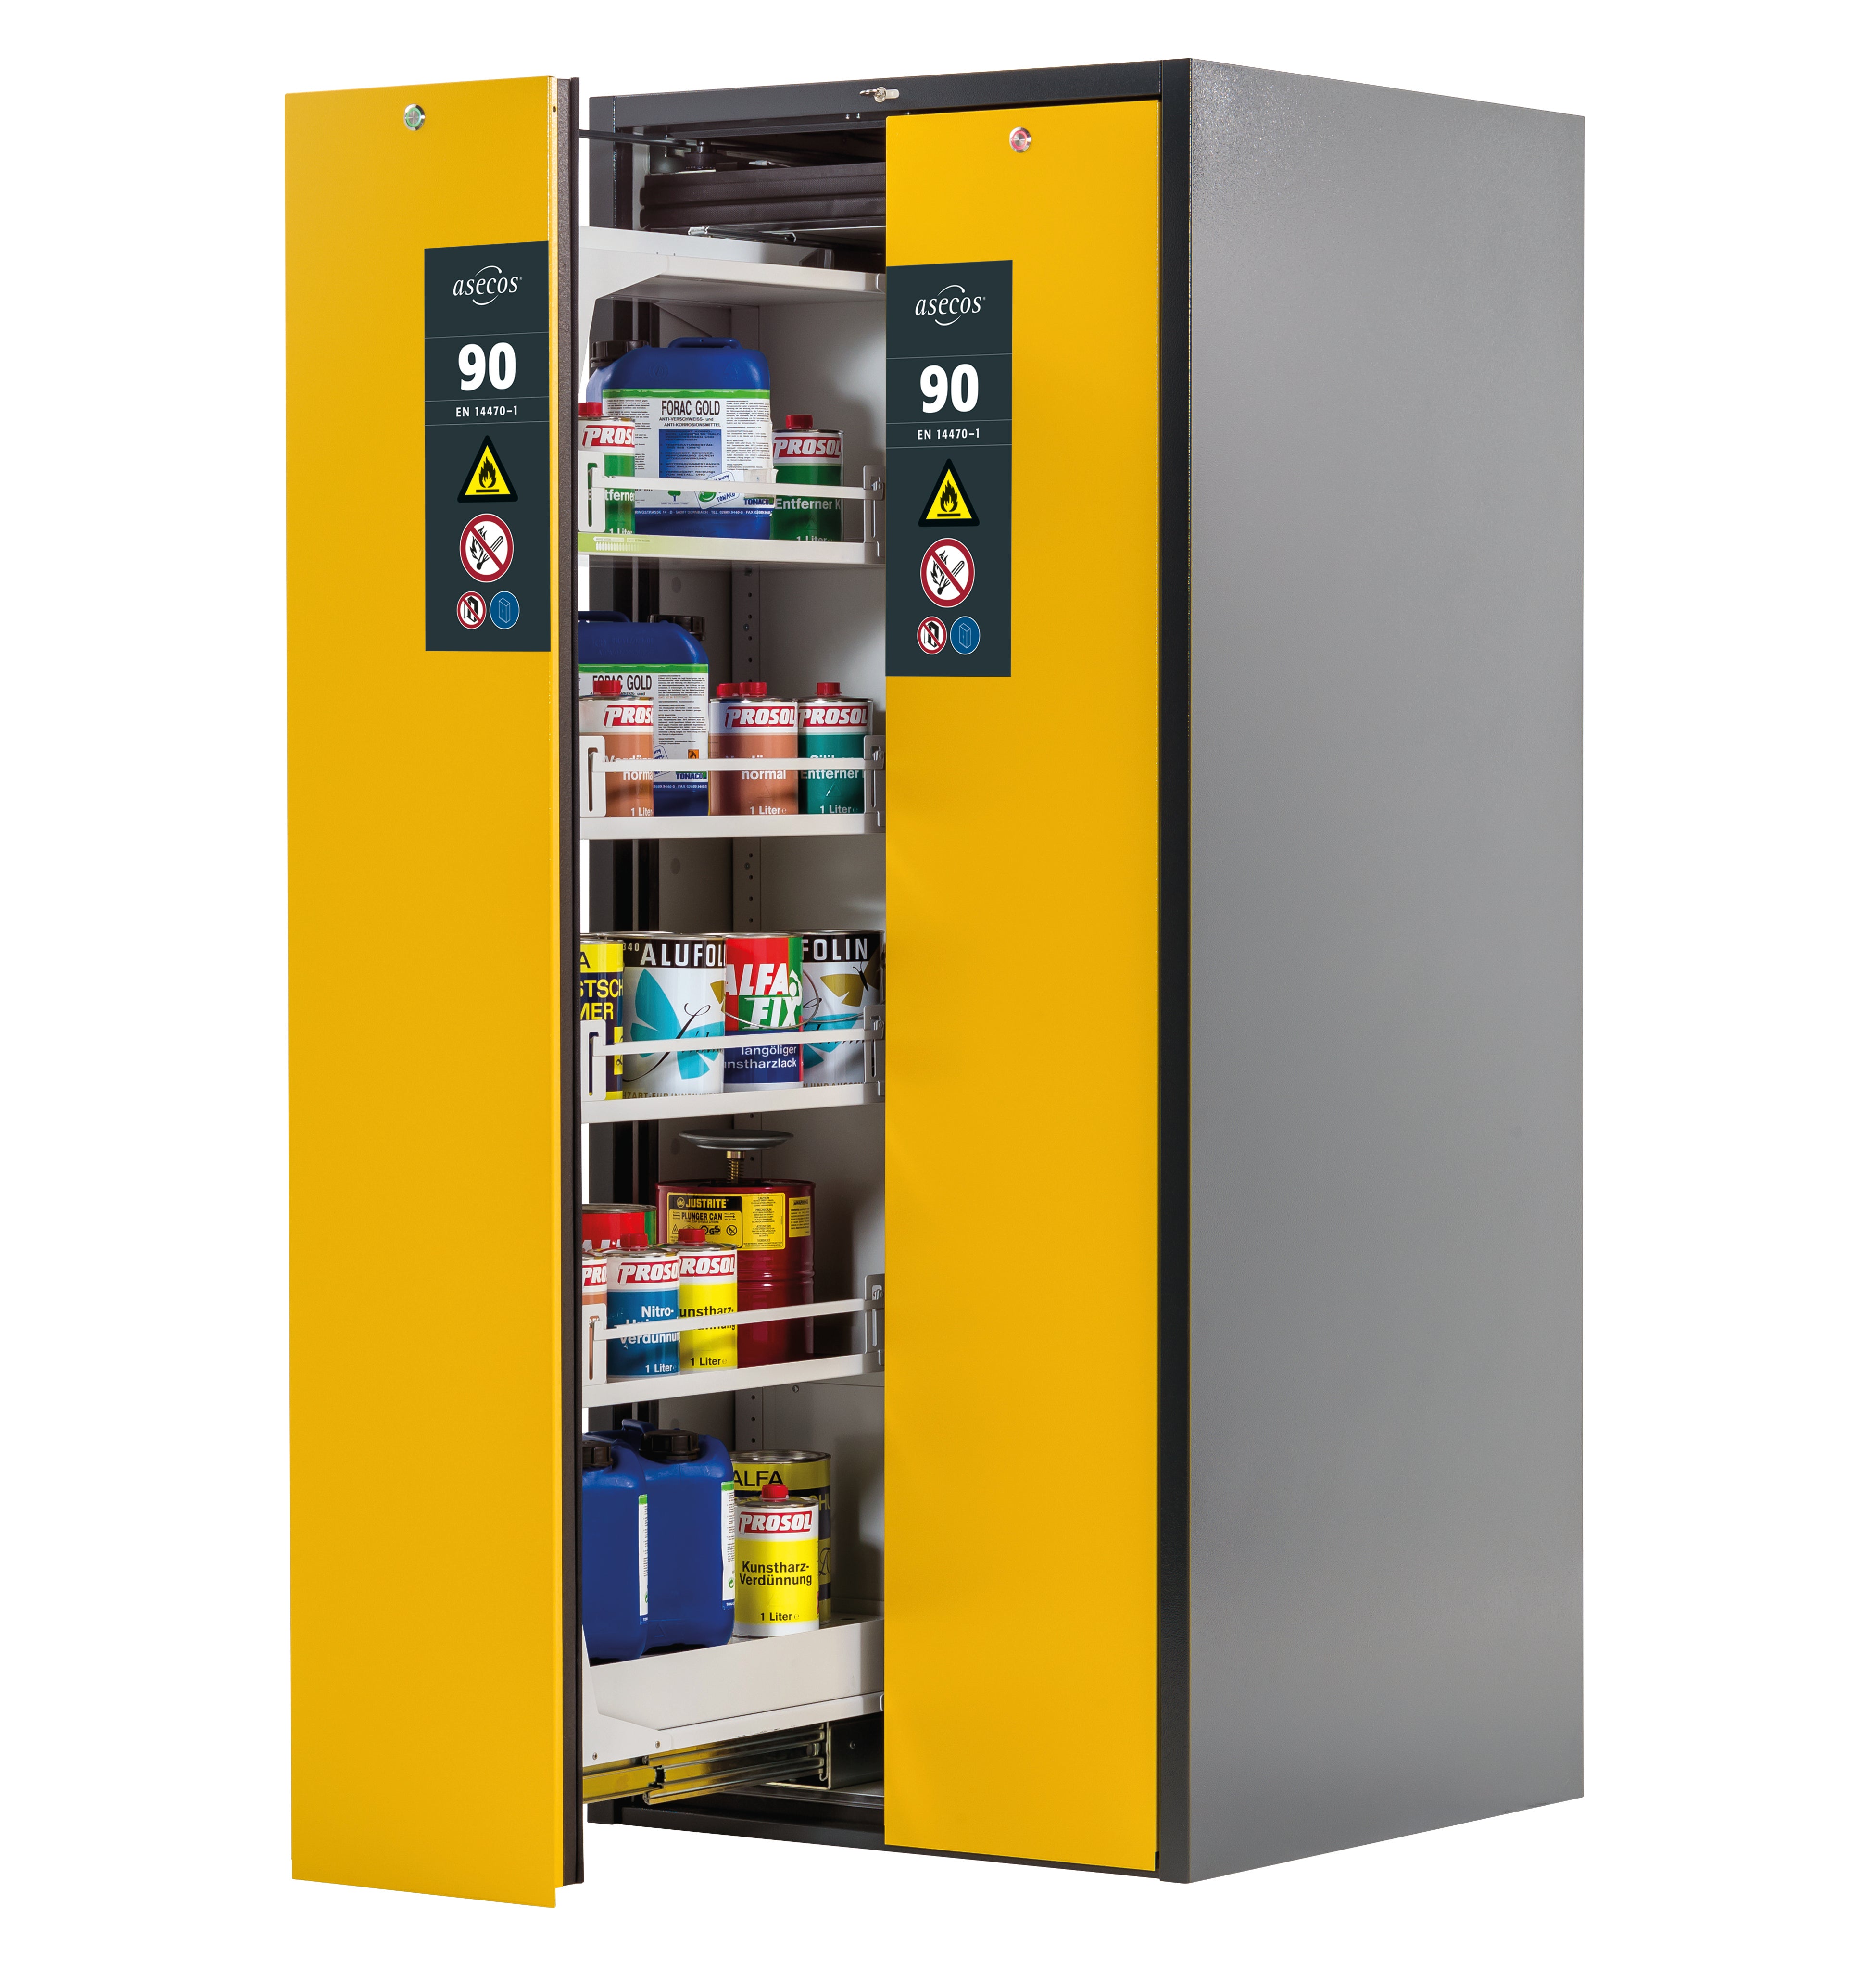 Type 90 safety cabinet V-MOVE-90 model V90.196.081.VDAC:0013 in safety yellow RAL 1004 with 4x standard shelves (sheet steel)